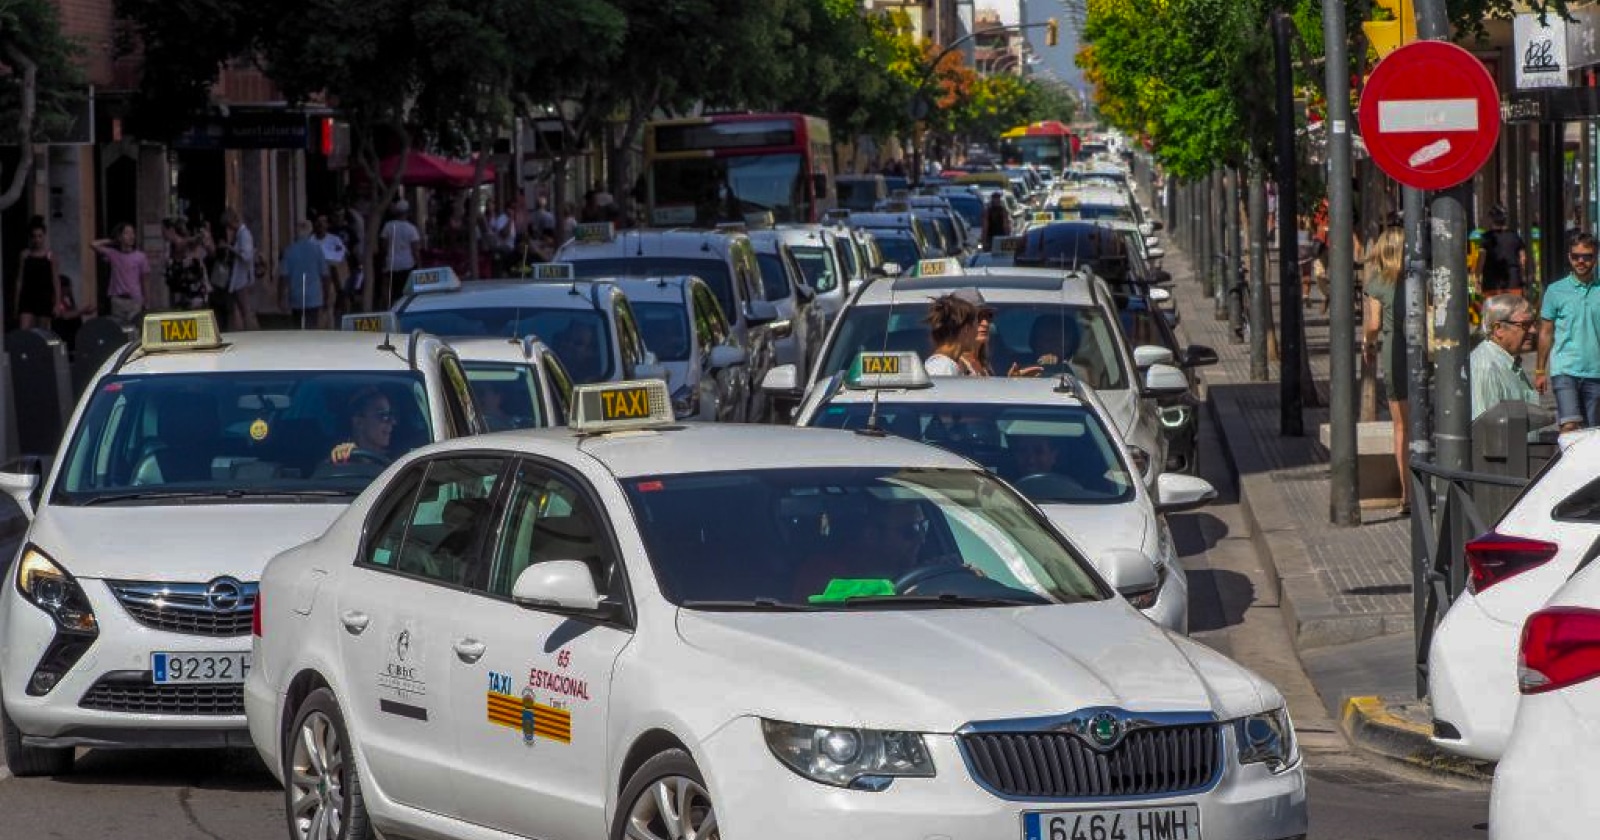 Uber in Ibiza? The Next Best Thing 9